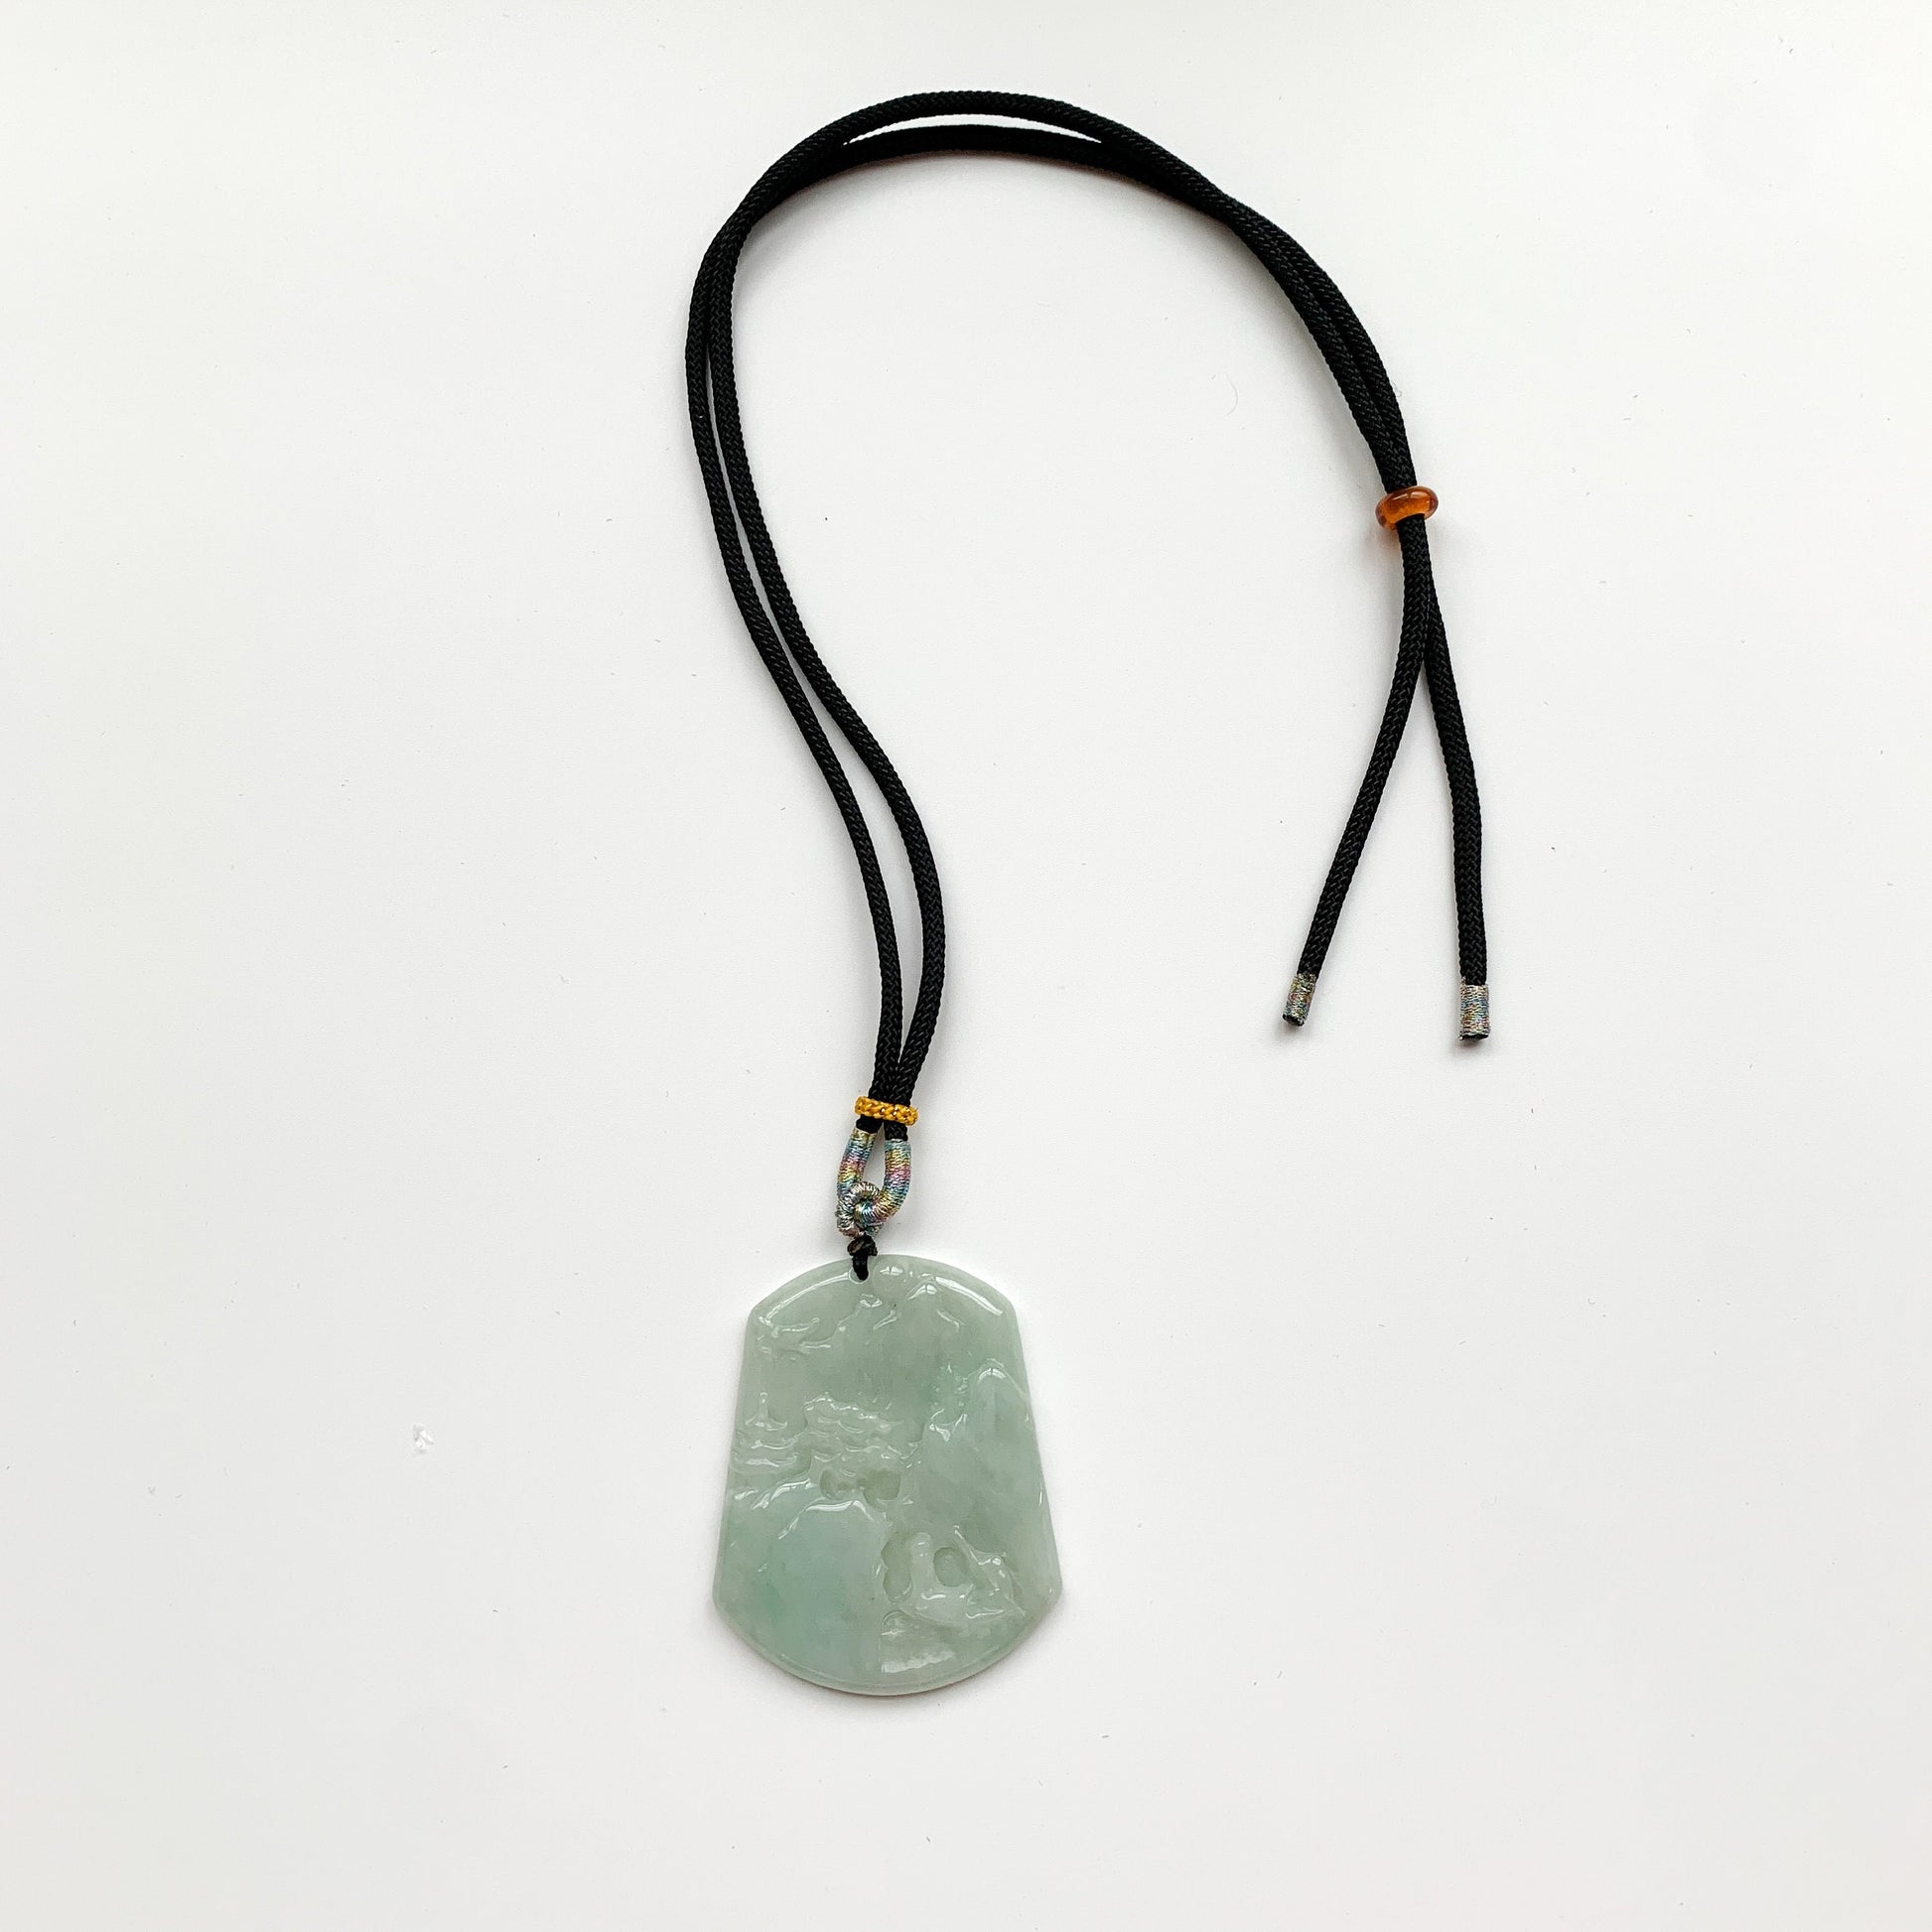 Jadeite Jade Landscape Mountain Forest River Scenery Hand Carved Pendant Necklace, YJ-0321-0318729 - AriaDesignCollection